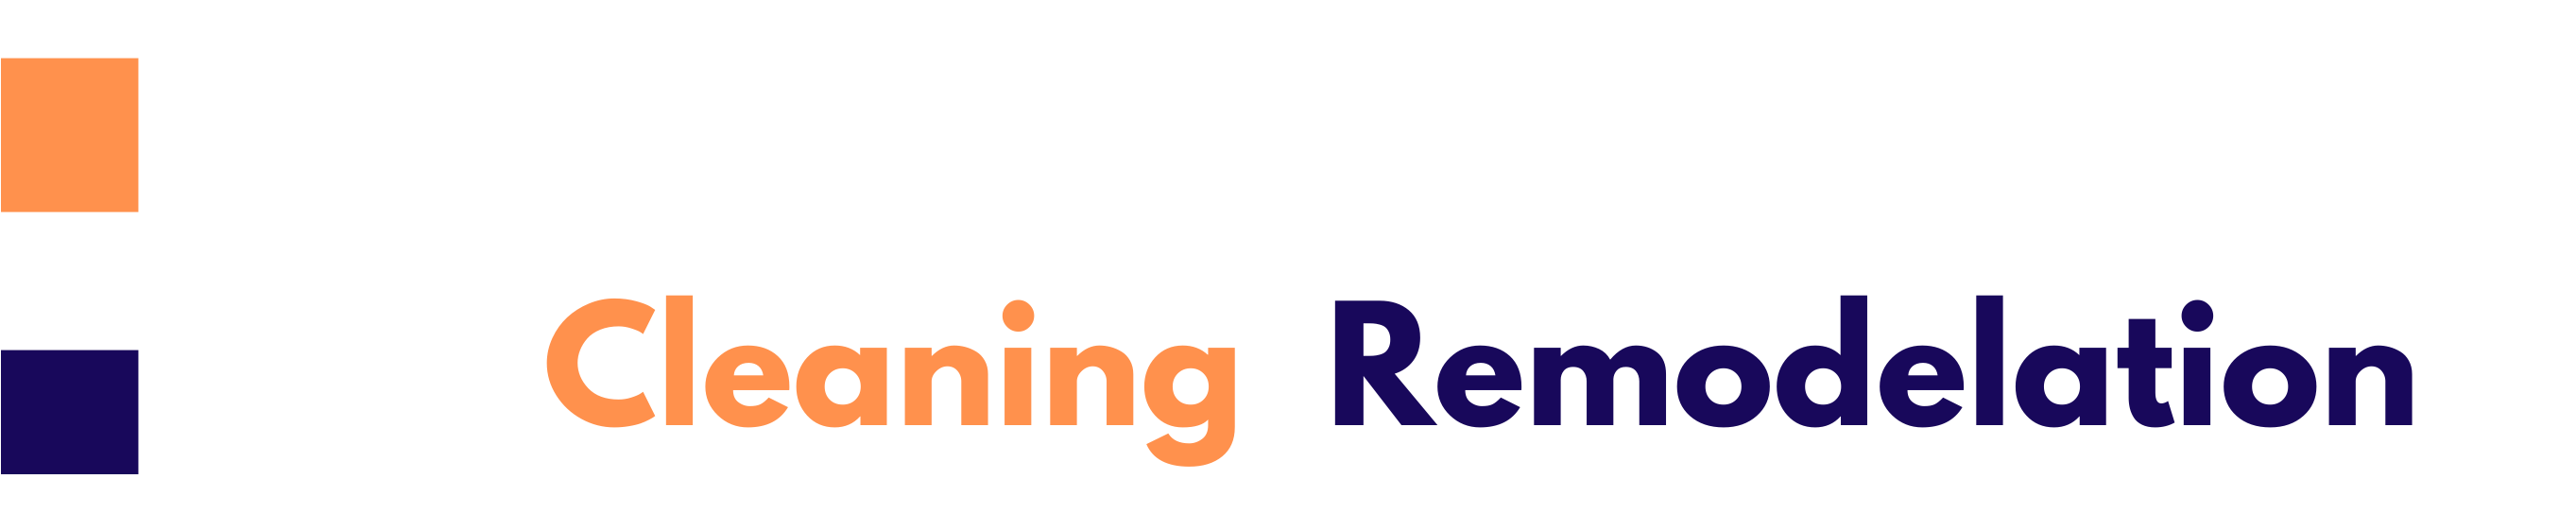 Remodeling and cleaning service contractor near me | RP Pro Services